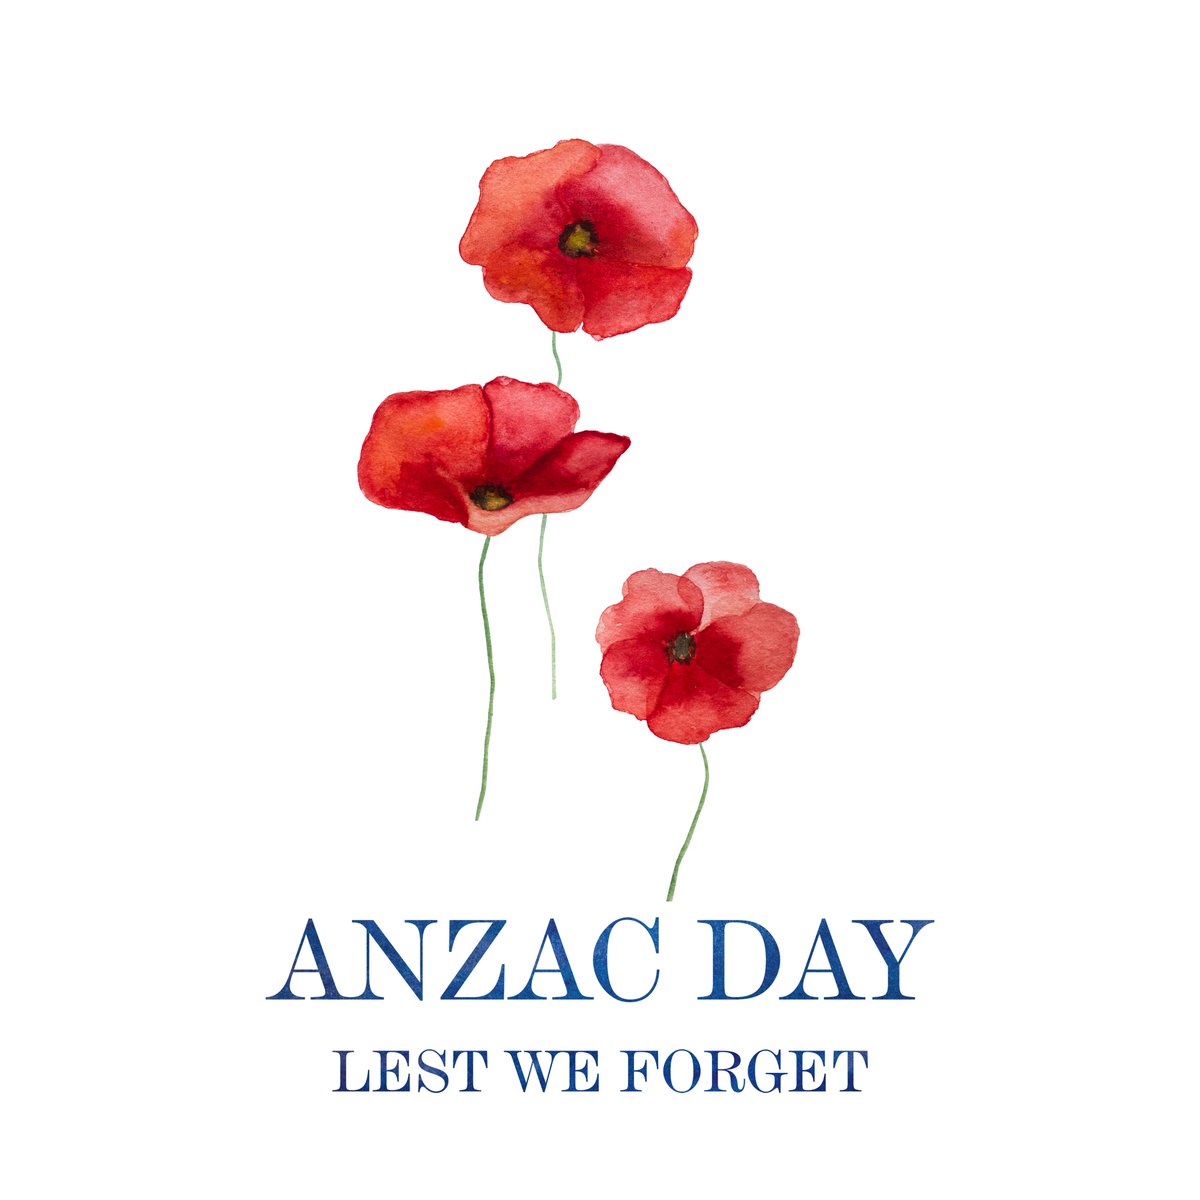 Today, on ANZAC Day, we honour the courage, sacrifice, resilience and mateship of all those who have served, and continue to serve in our armed forces, for our nation’s security and freedom. It’s a time to reflect and reaffirm our commitment to supporting veterans, and ensure